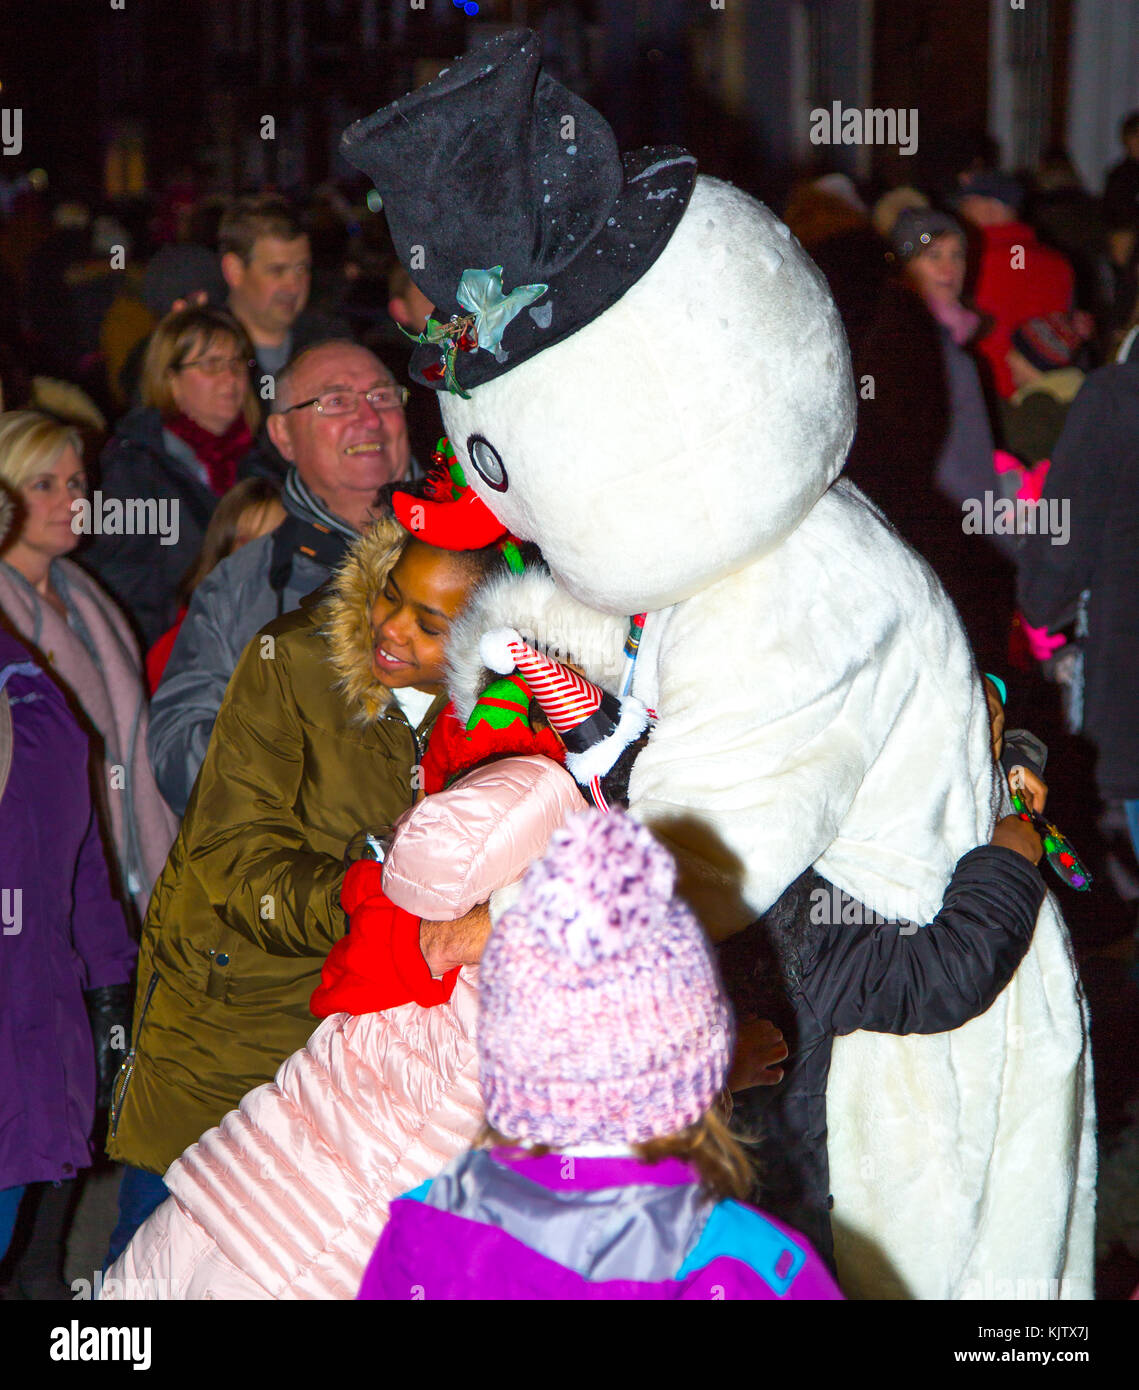 Excited children rush to receive enormous hugs from Frosty the Snowman during a UK Christmas street parade. A magical moment. Stock Photo